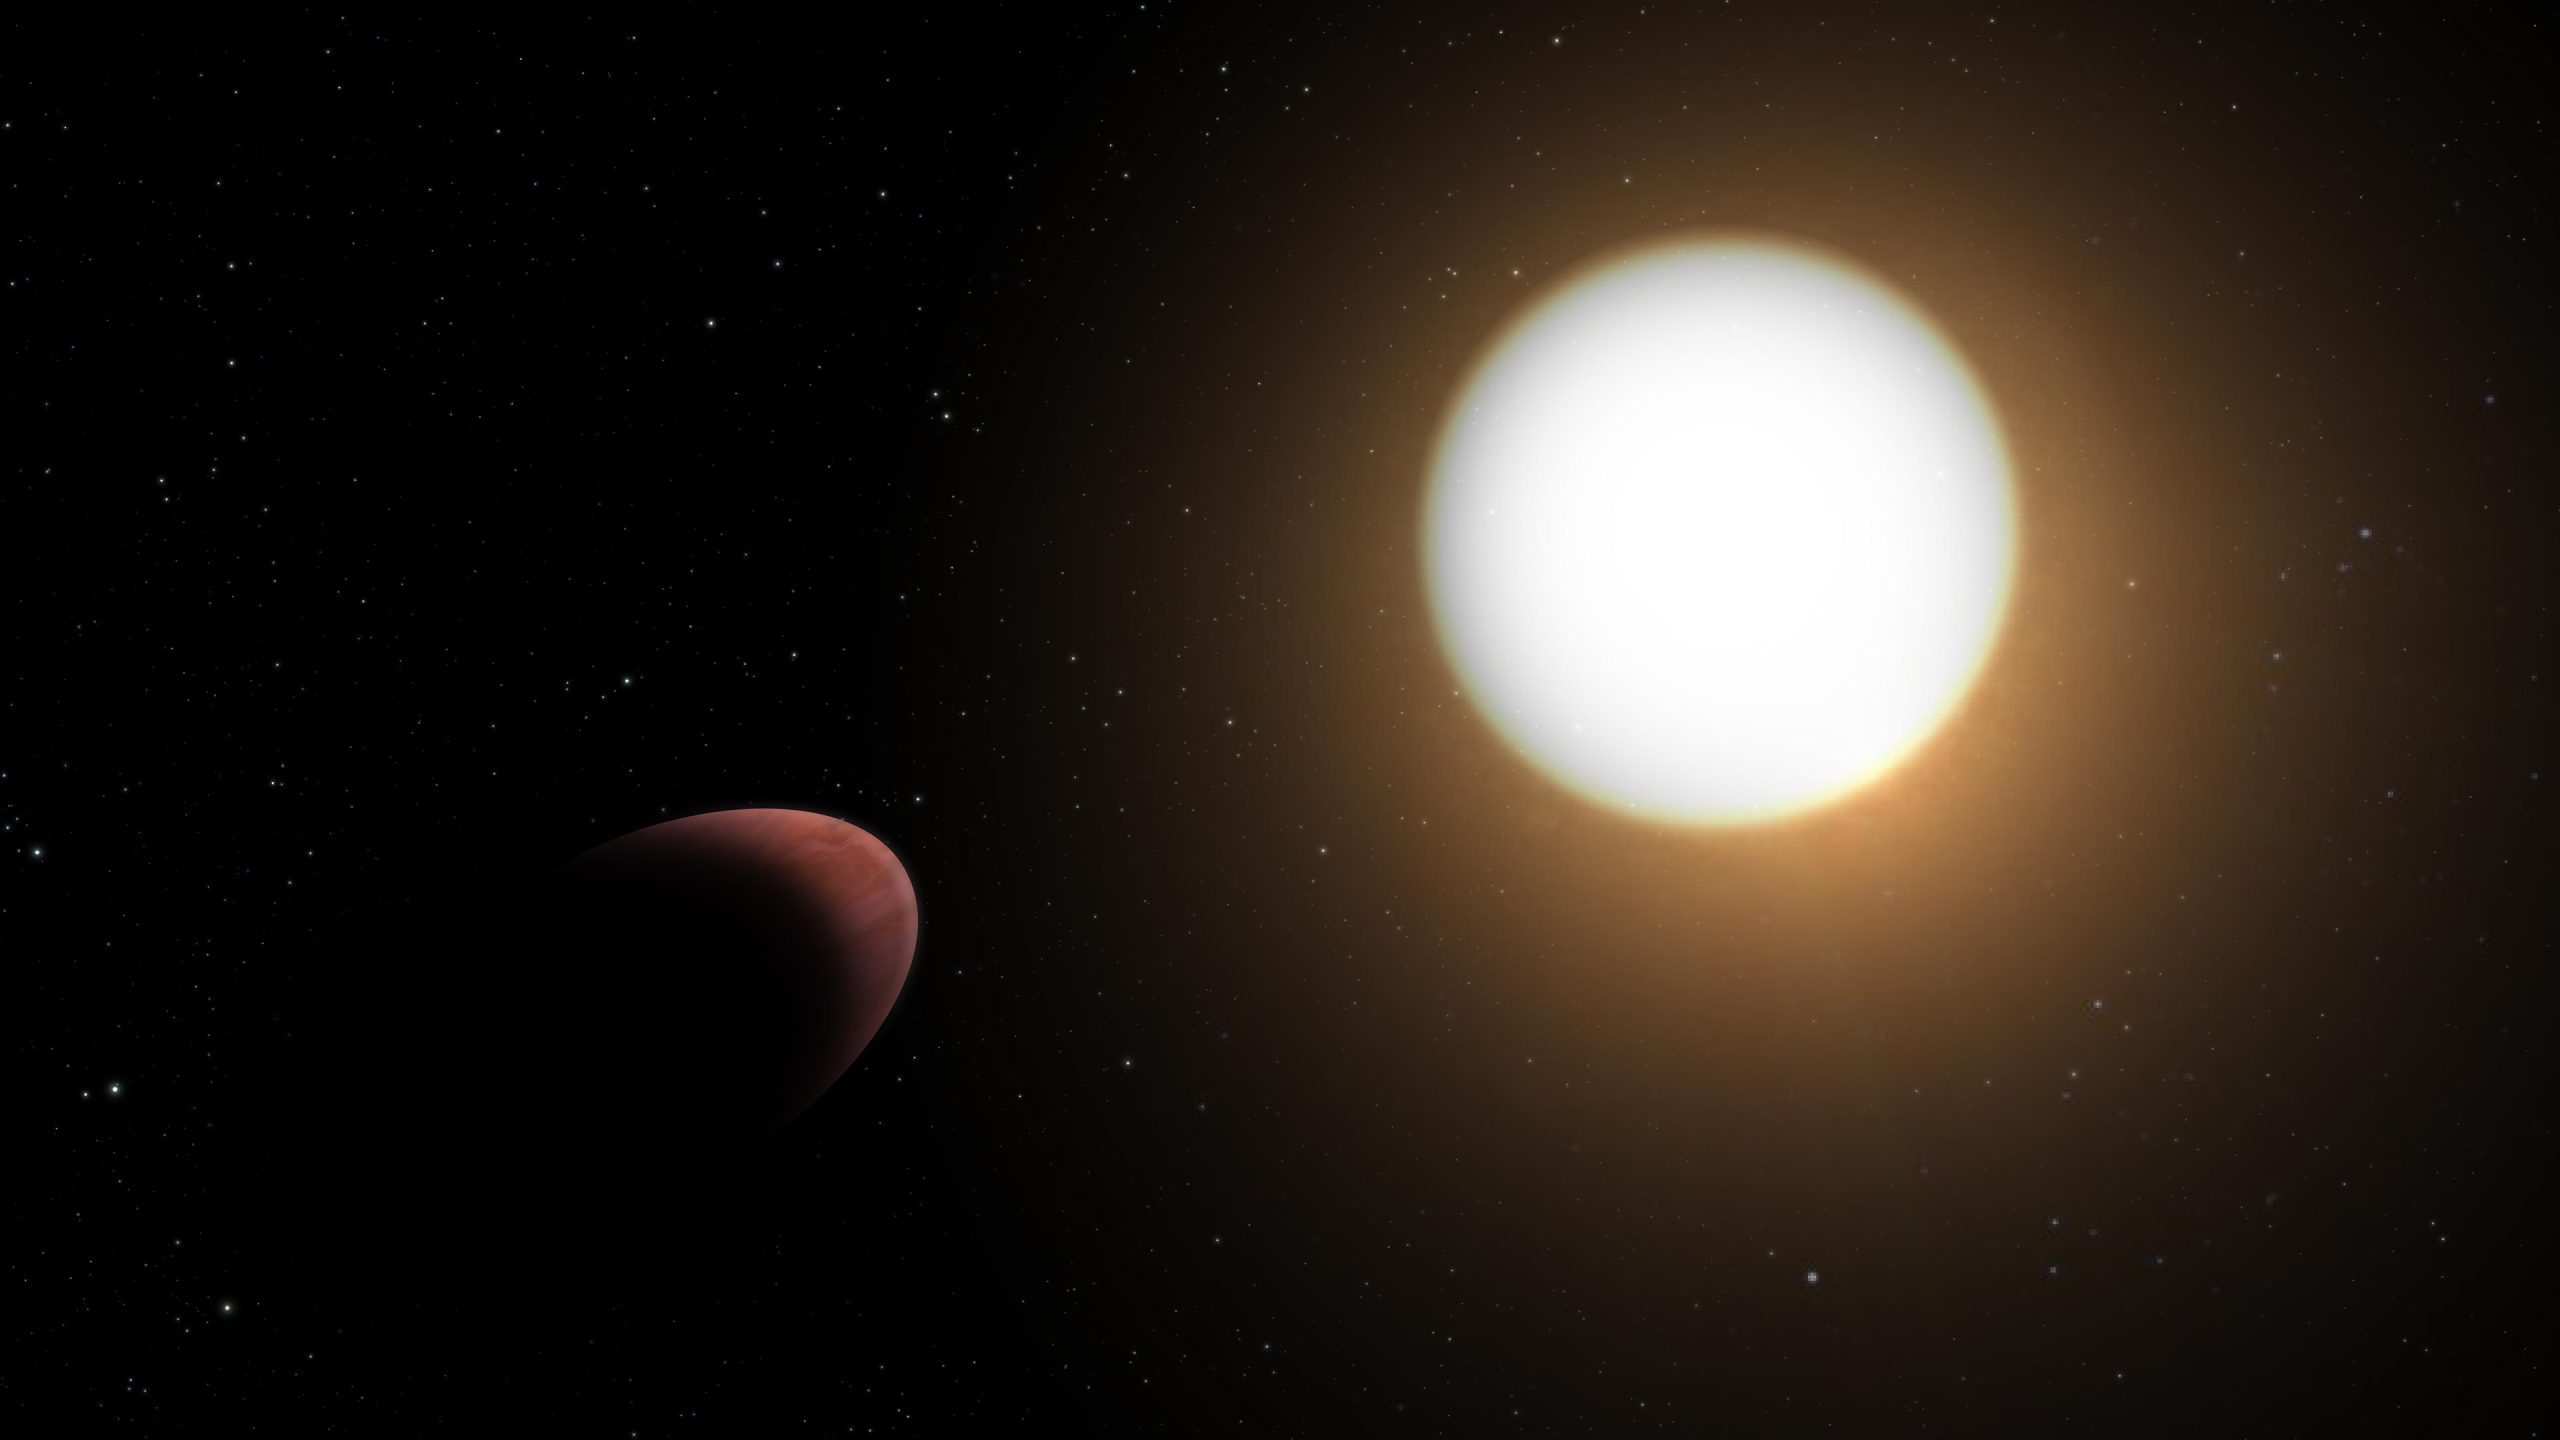 Strange Deformed Planet With Mysterious Motion Detected by Exoplanet Mission Cheops - SciTechDaily